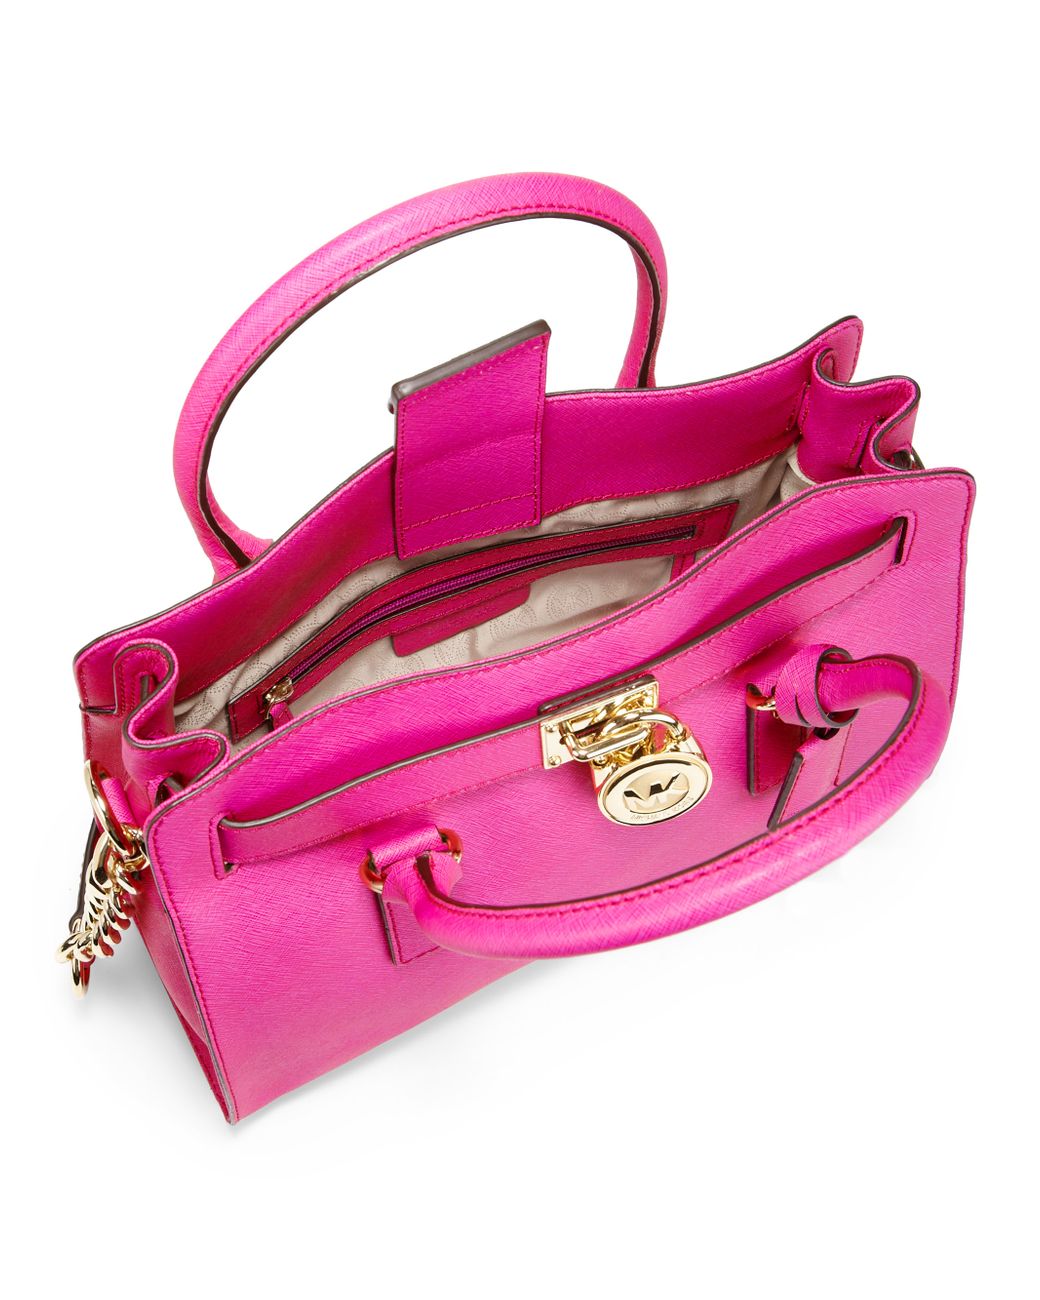 The Perfect Hot Pink Bag  Classy Sometimes Can Be Interrupted